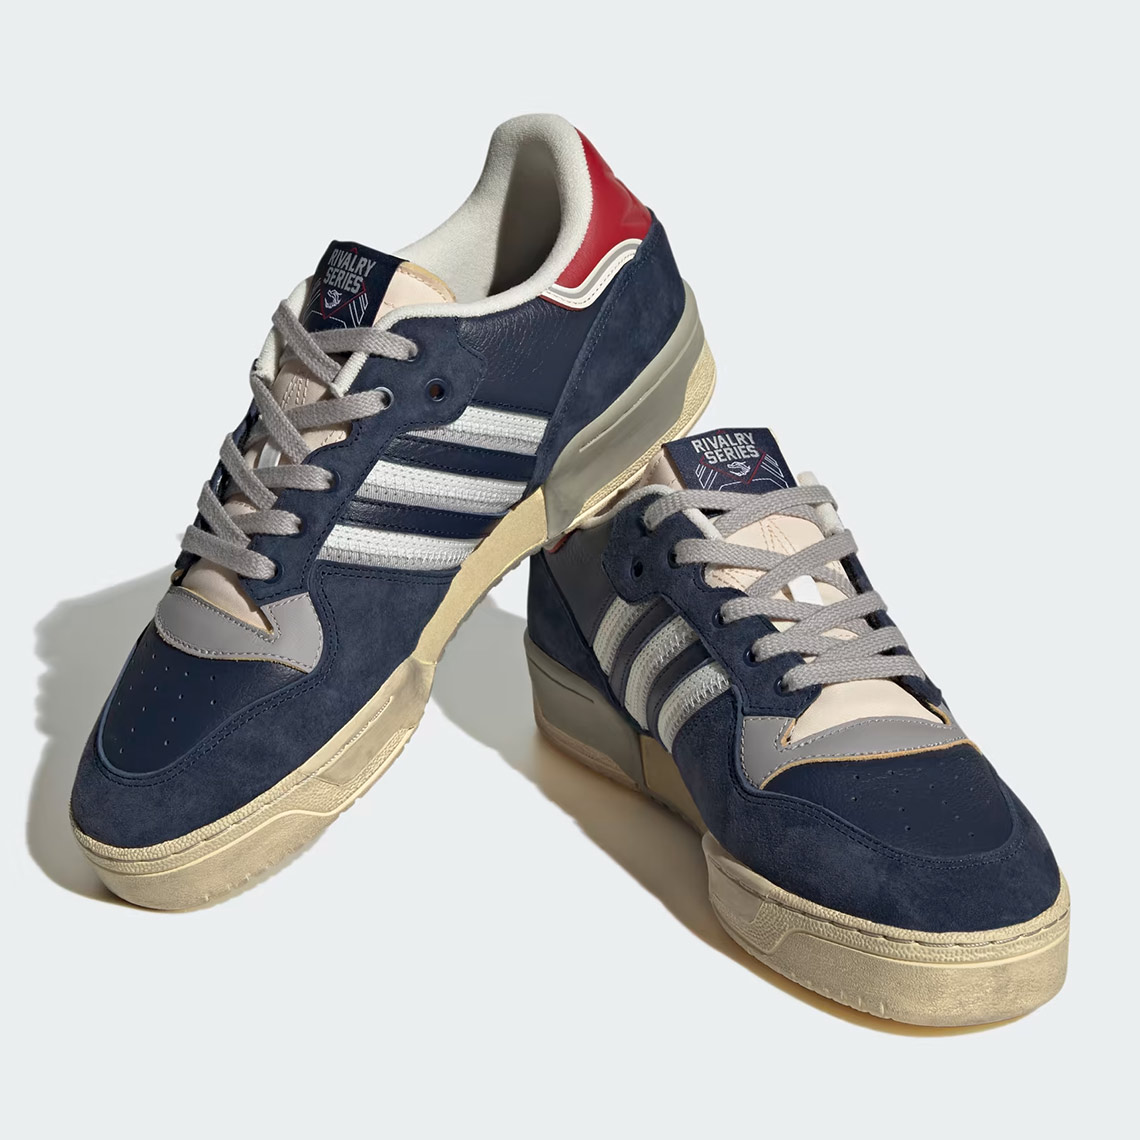 Extra Butter Adidas Consortium Rivalry Rangers Id2870 7